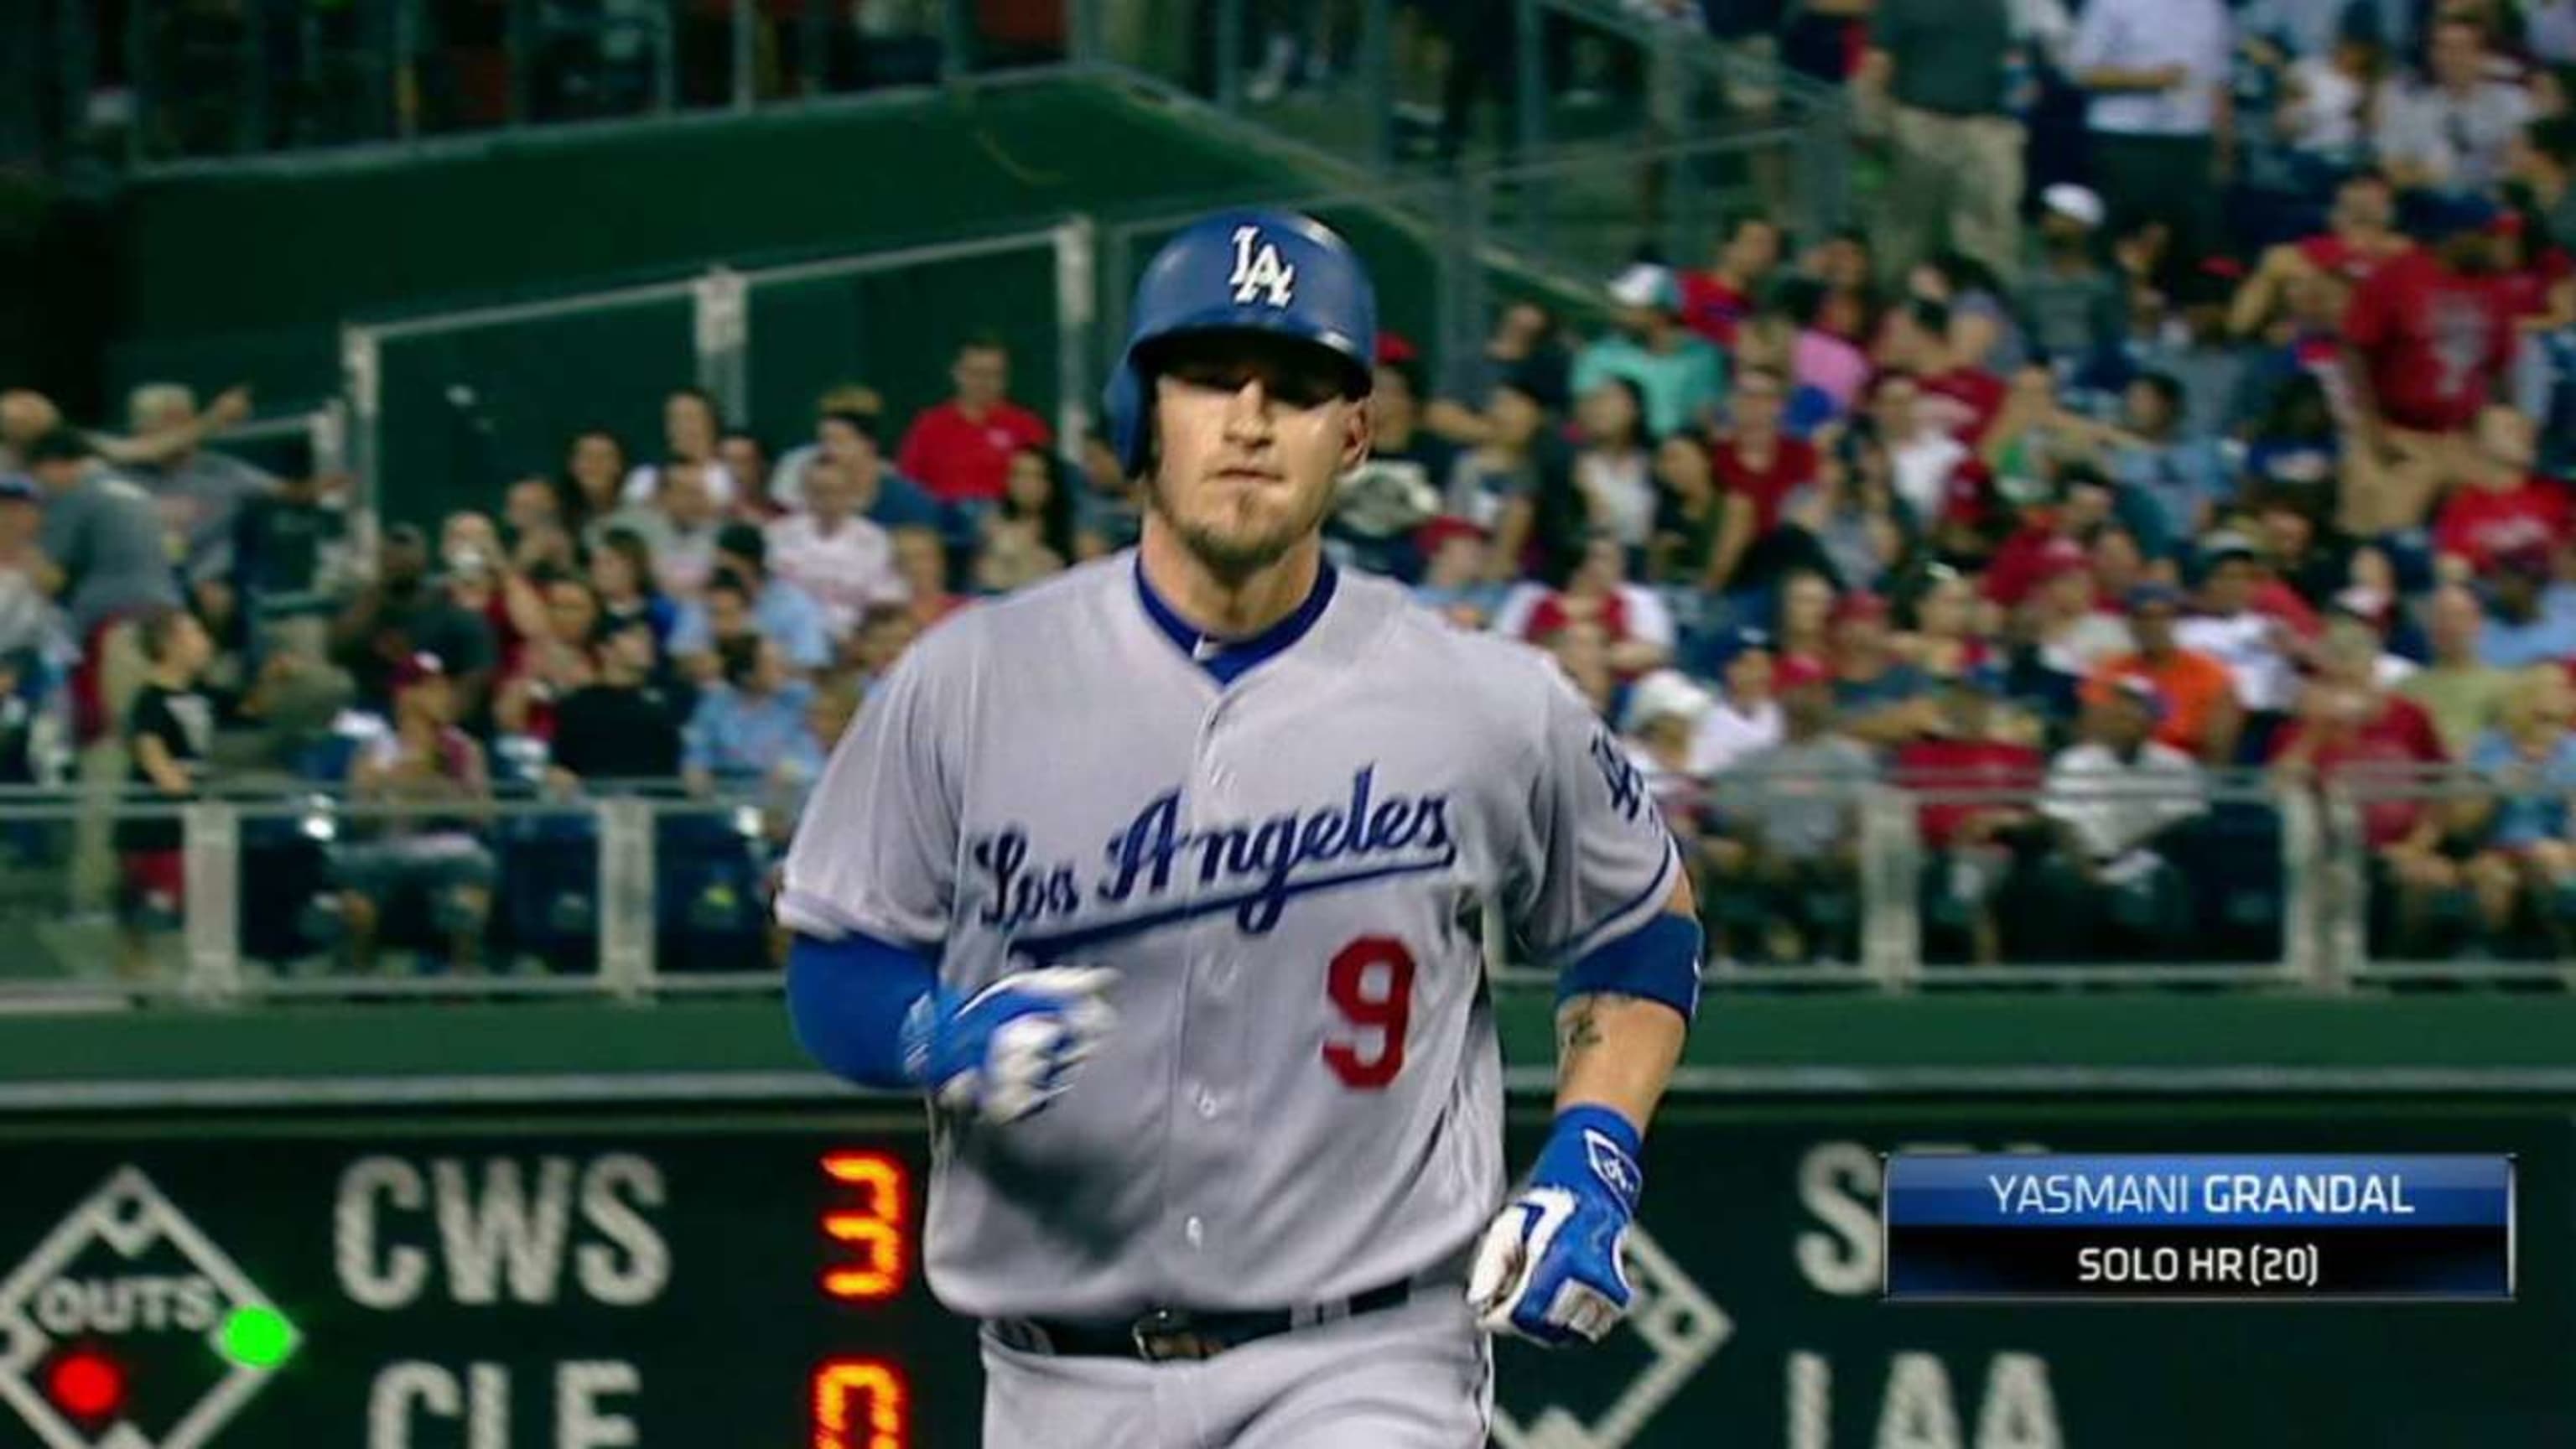 Yasmani Grandal launched a solo shot directly at the picture of